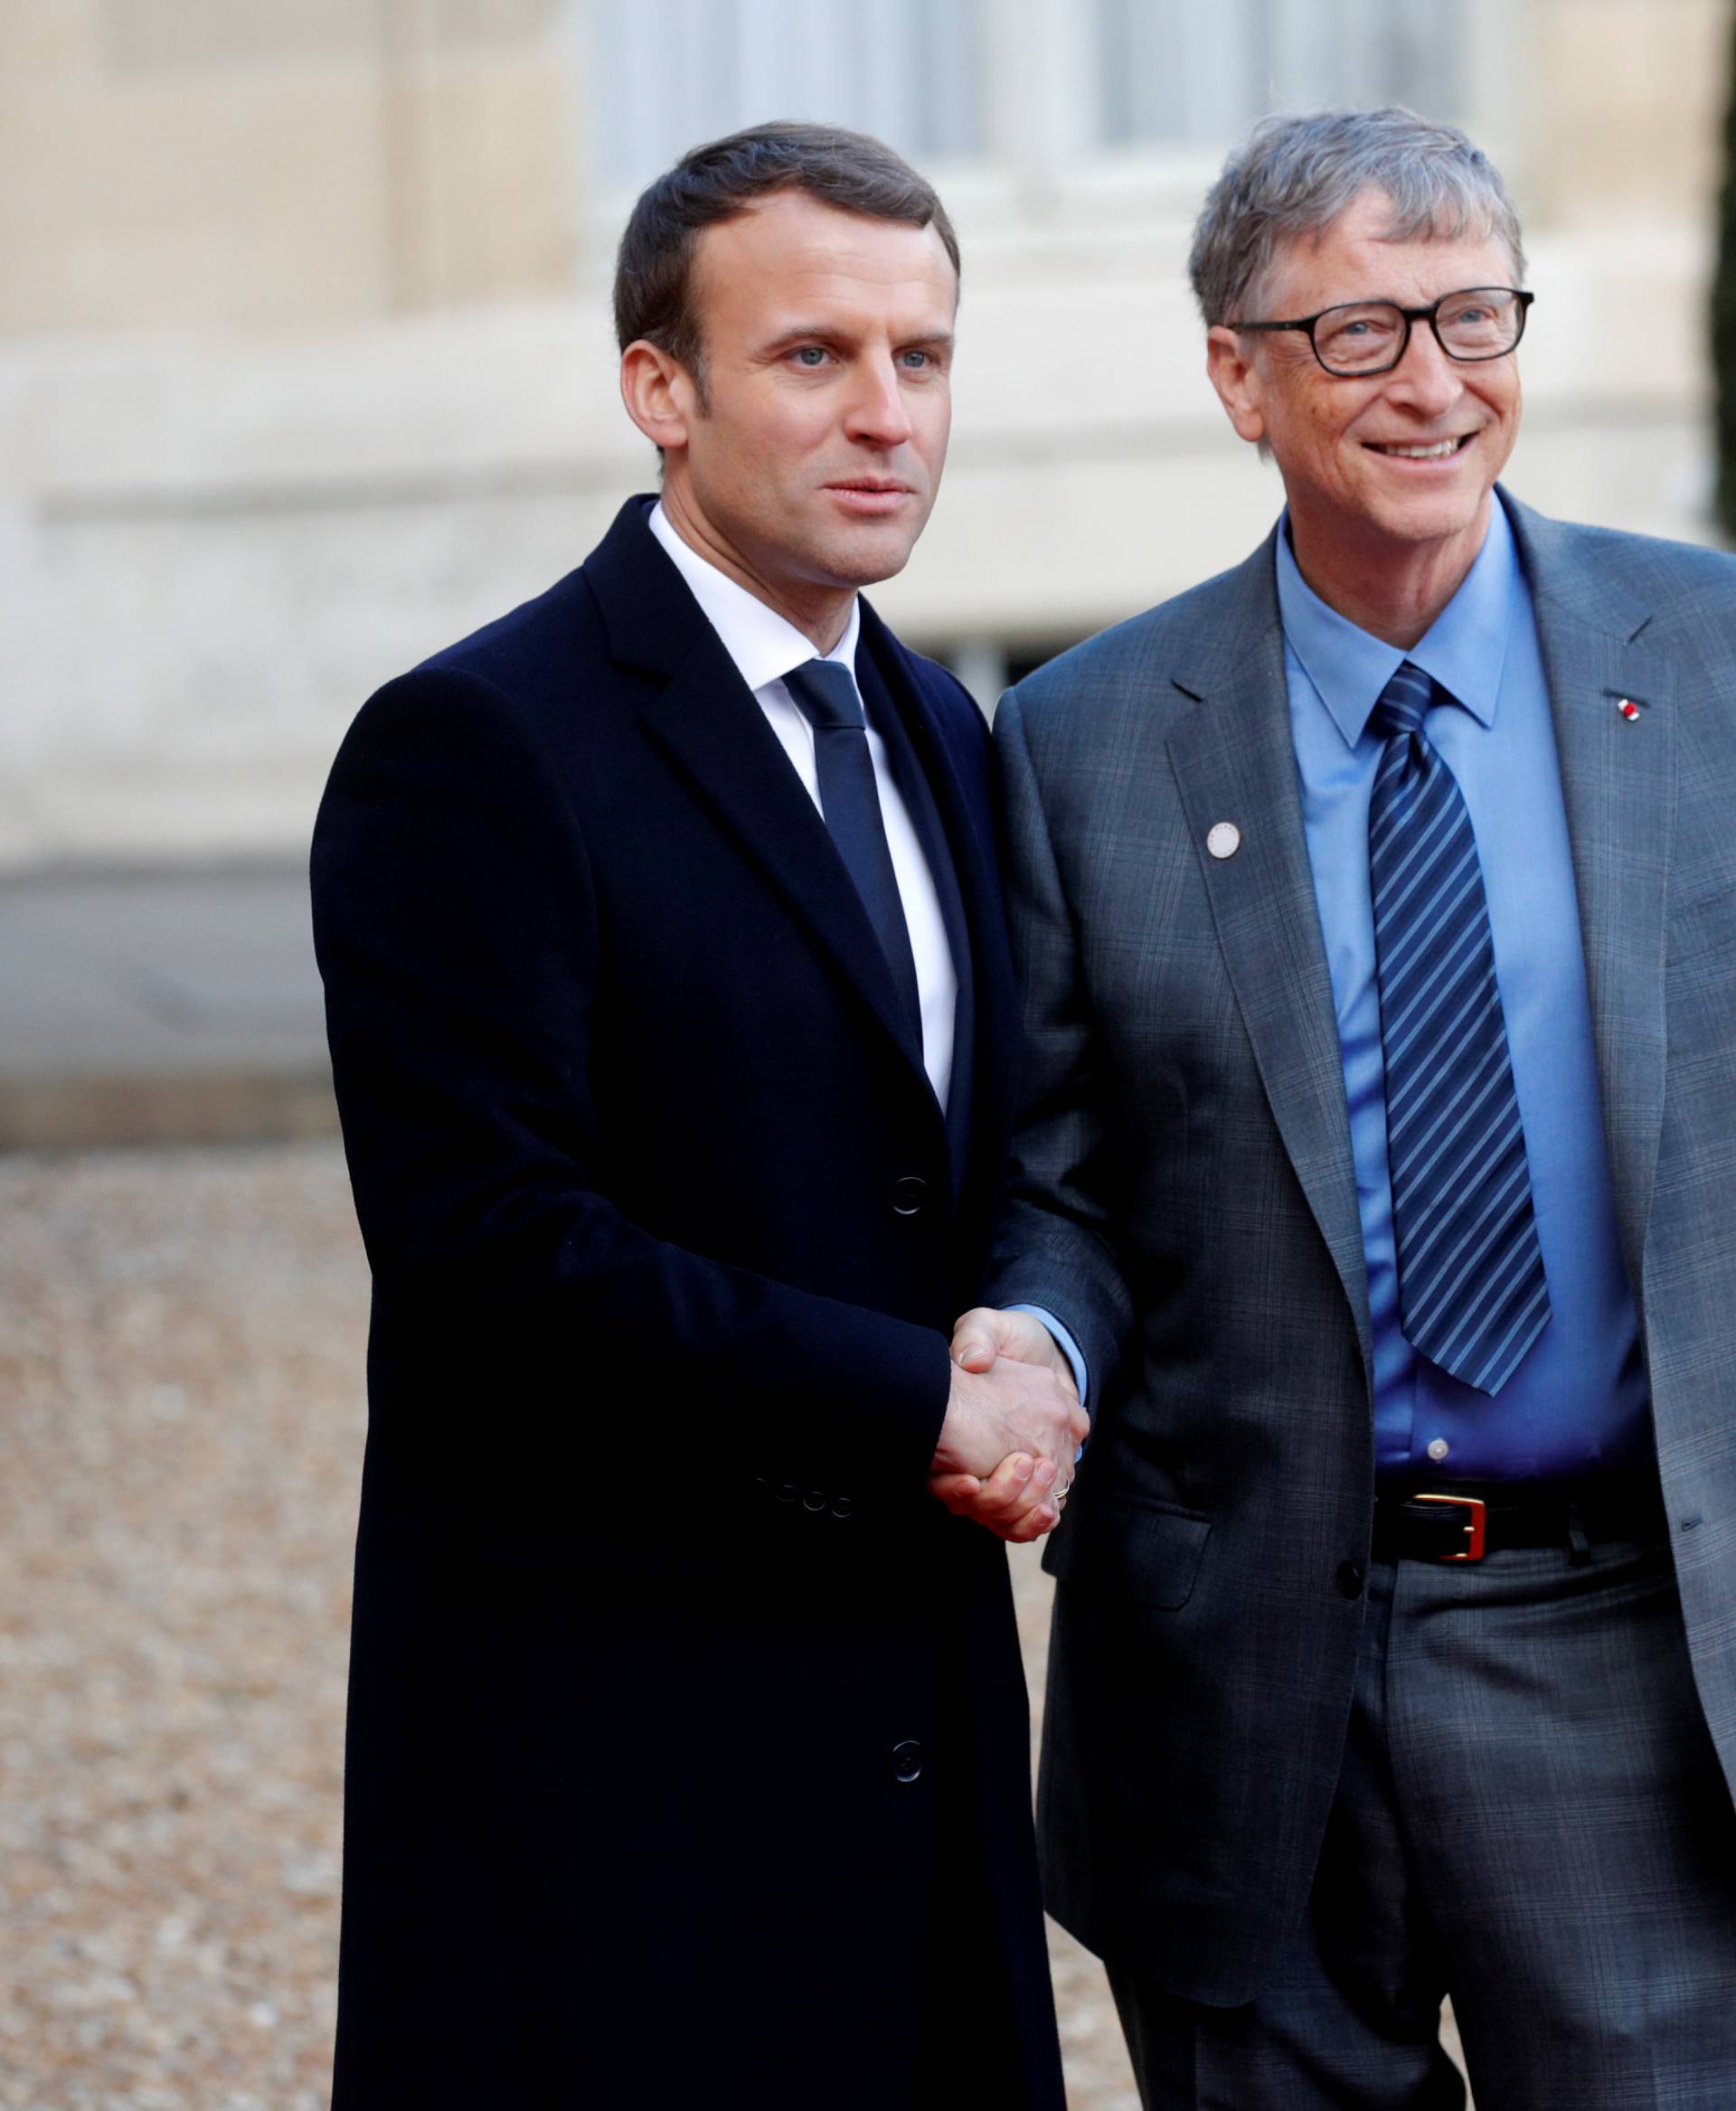 French President Emmanuel Macron welcomes Philanthropist and co-founder of the Microsoft Corporation Bill Gates for a lunch at the Elysee Palace as part of the One Planet Summit in Paris